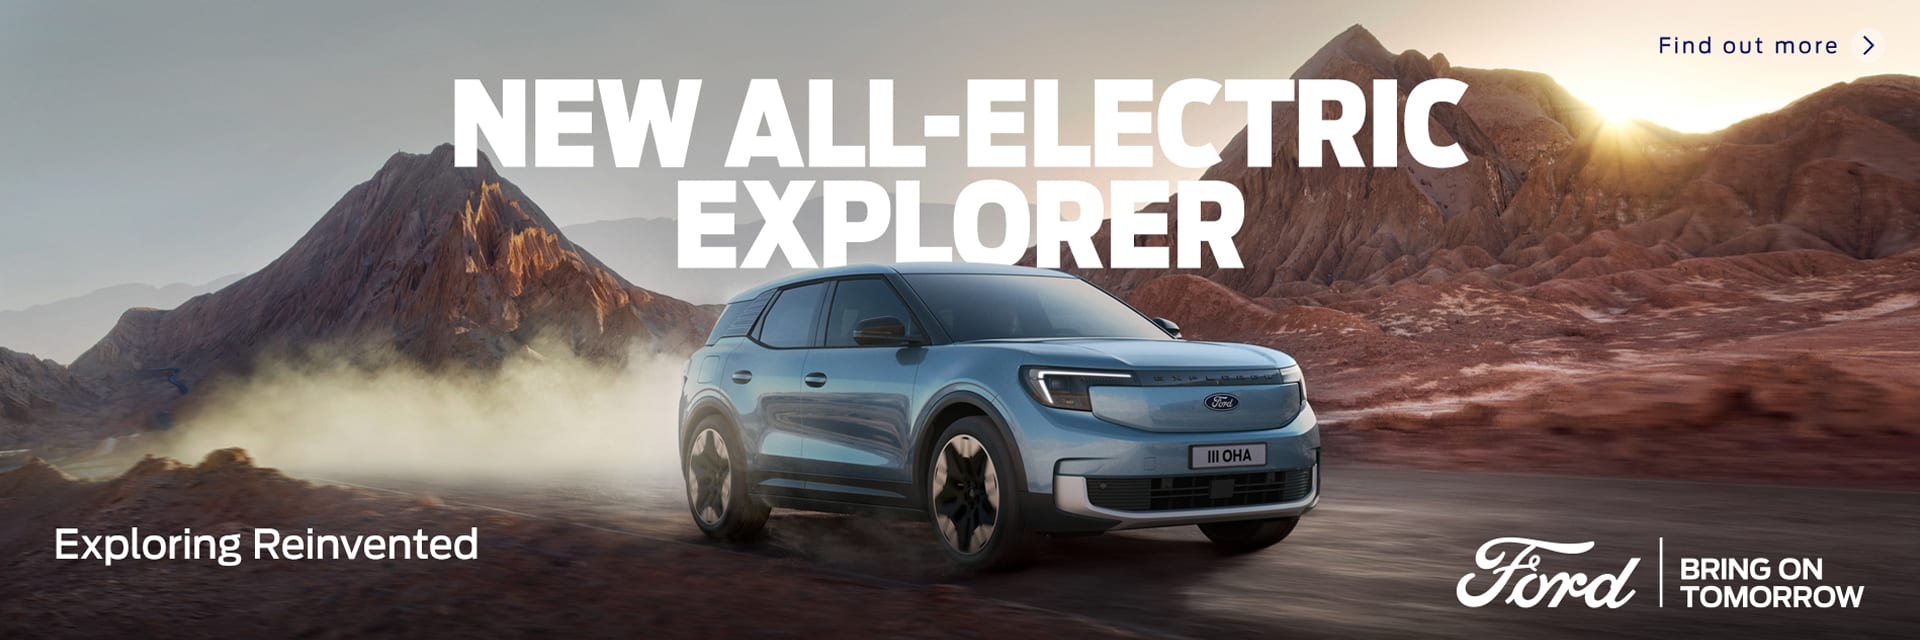 New all electric Ford Explorer